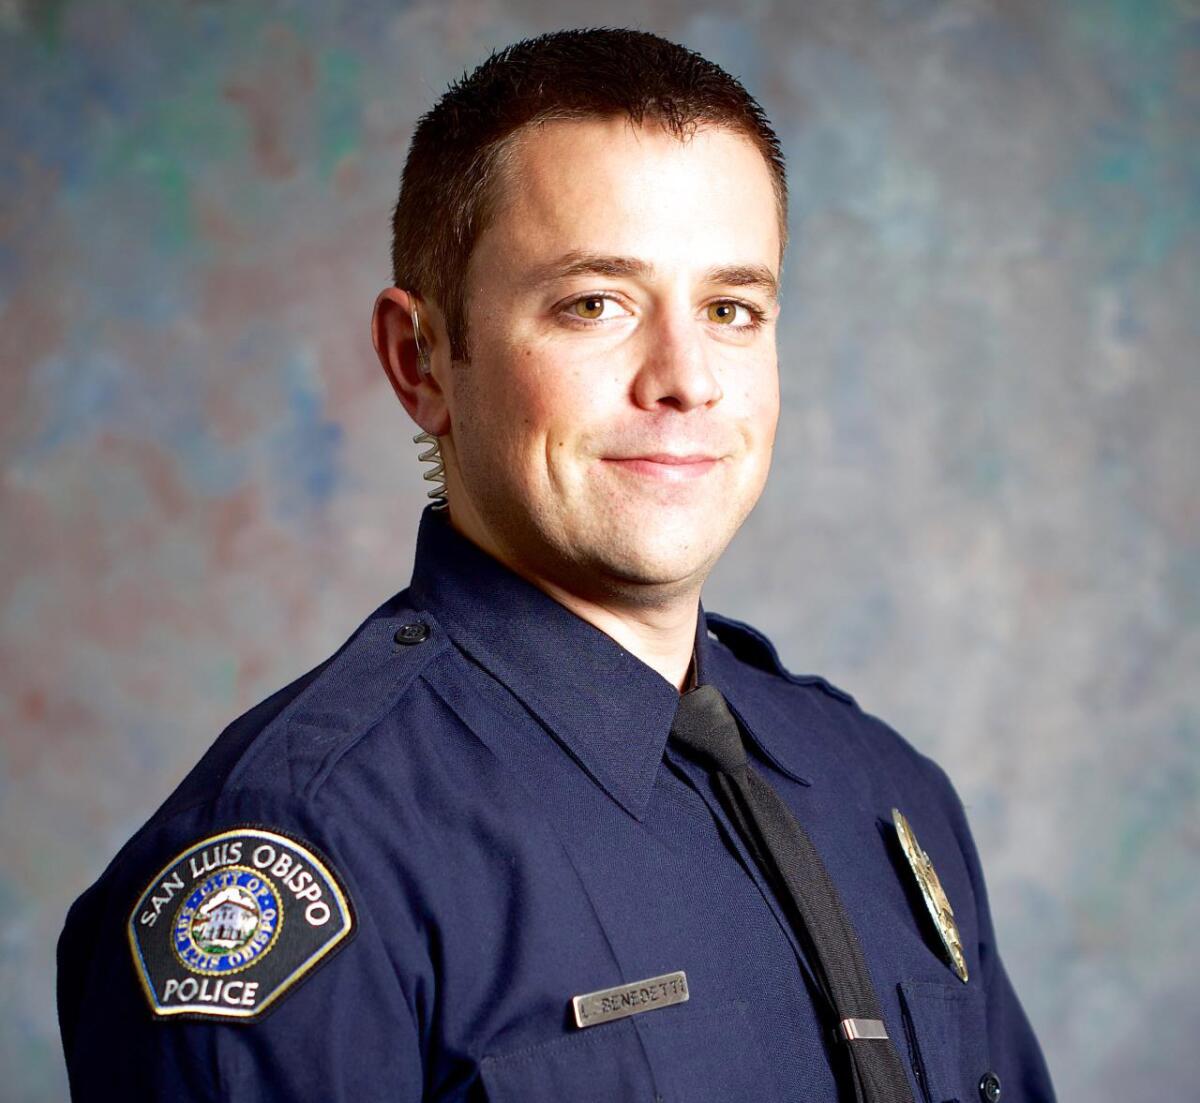 A portrait of a police officer.